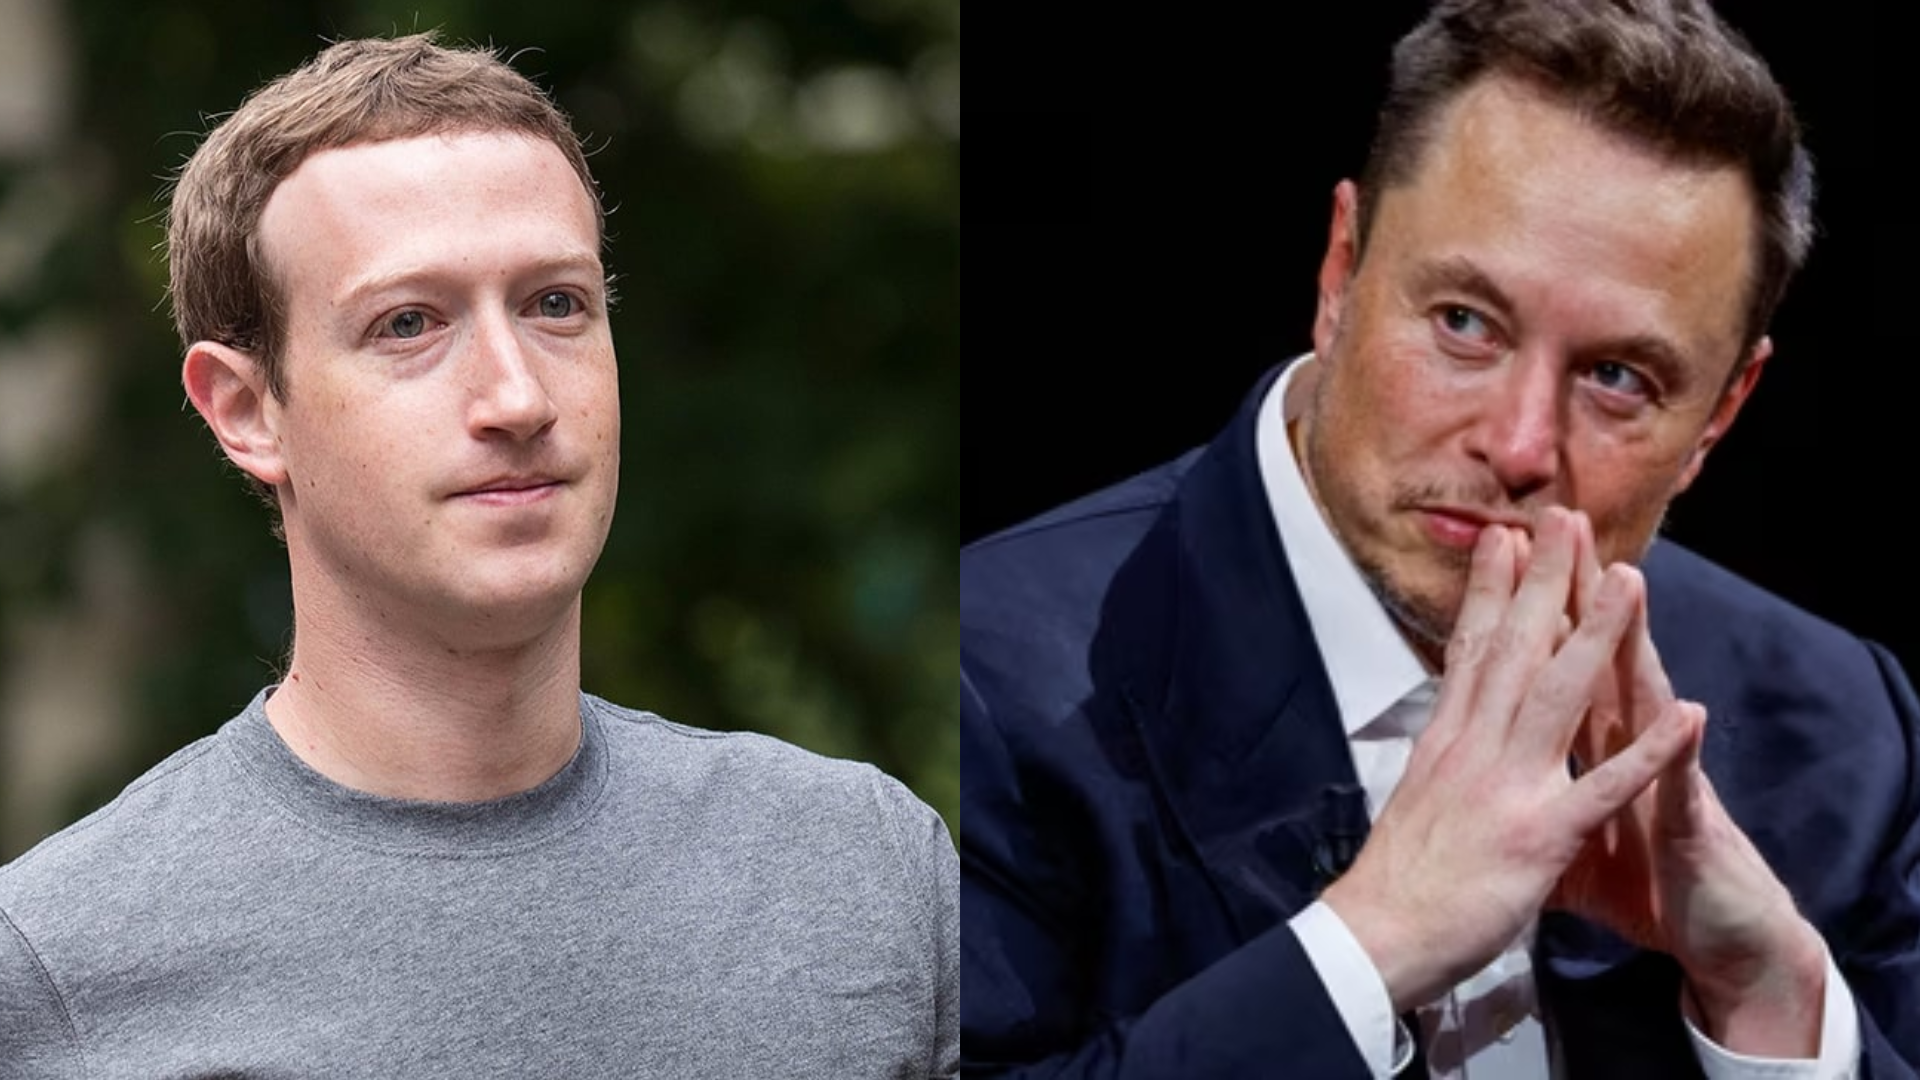 Mark Zuckerberg Races Ahead Of Elon Musk To Become World’s Third Richest Person For The First Time In 4 Years